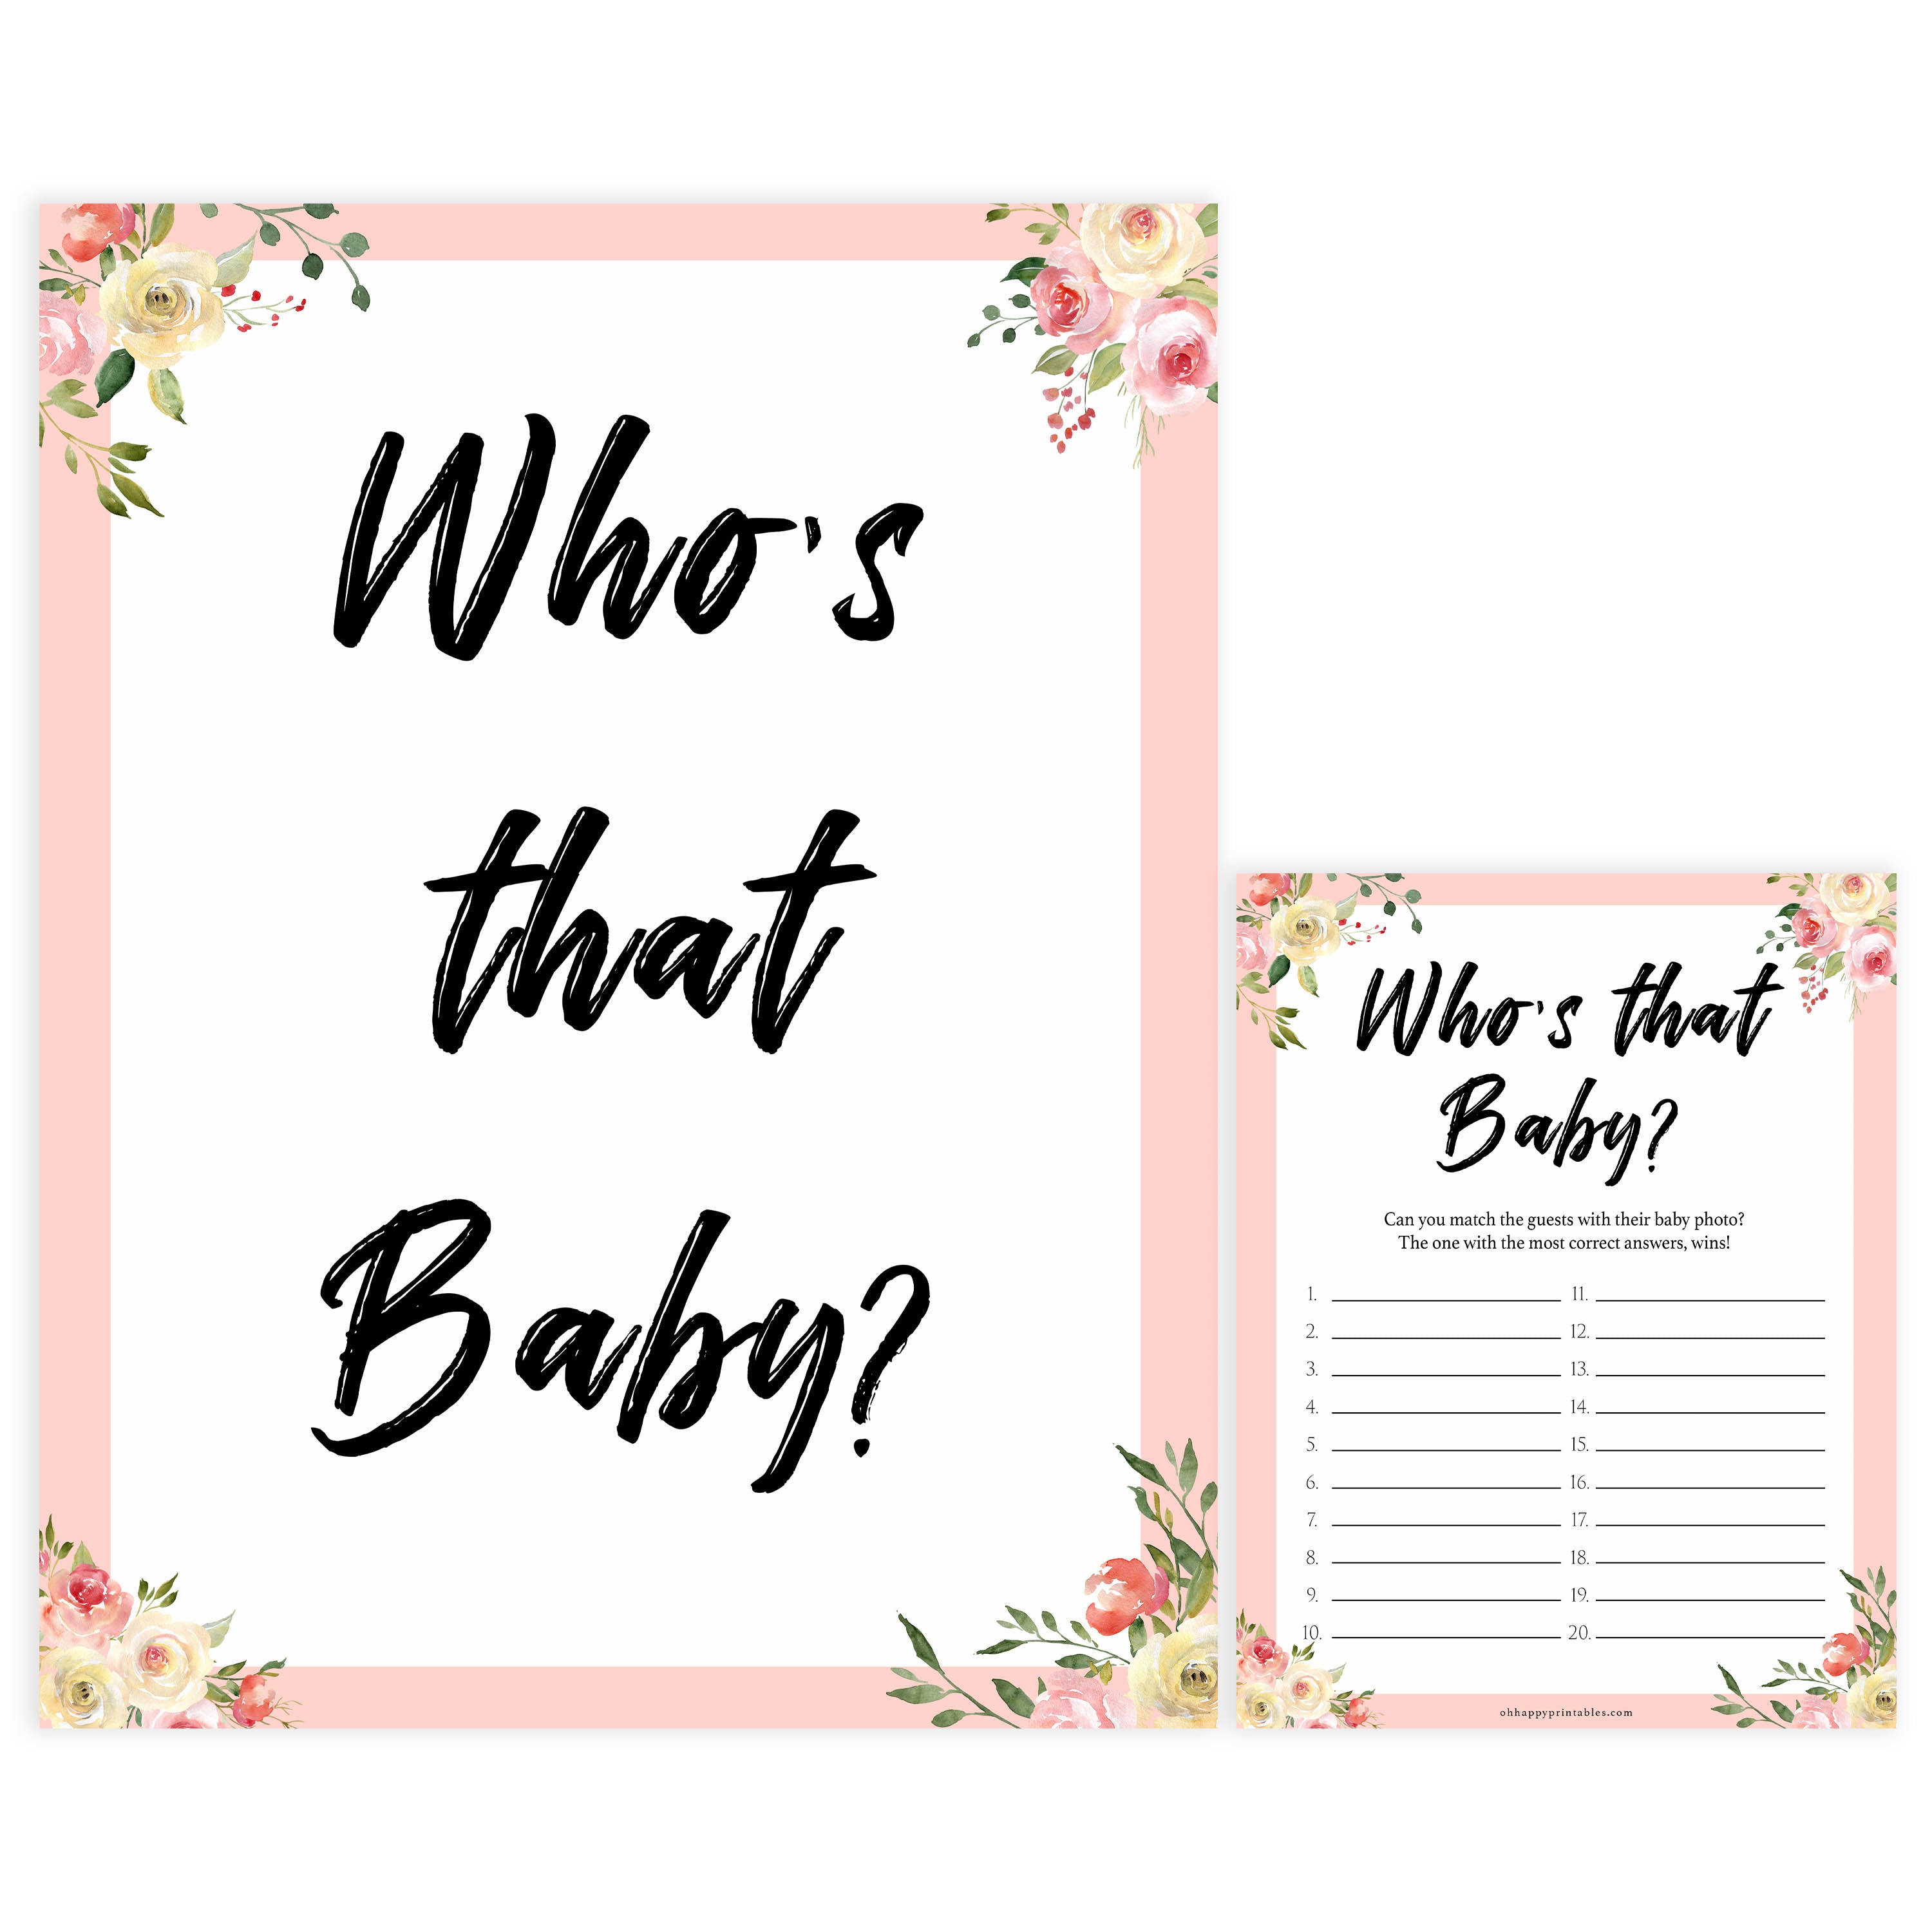 whos that baby game, guess the baby picture game, Printable baby shower games, floral fun baby games, baby shower games, fun baby shower ideas, top baby shower ideas, floral baby shower, blue baby shower ideas